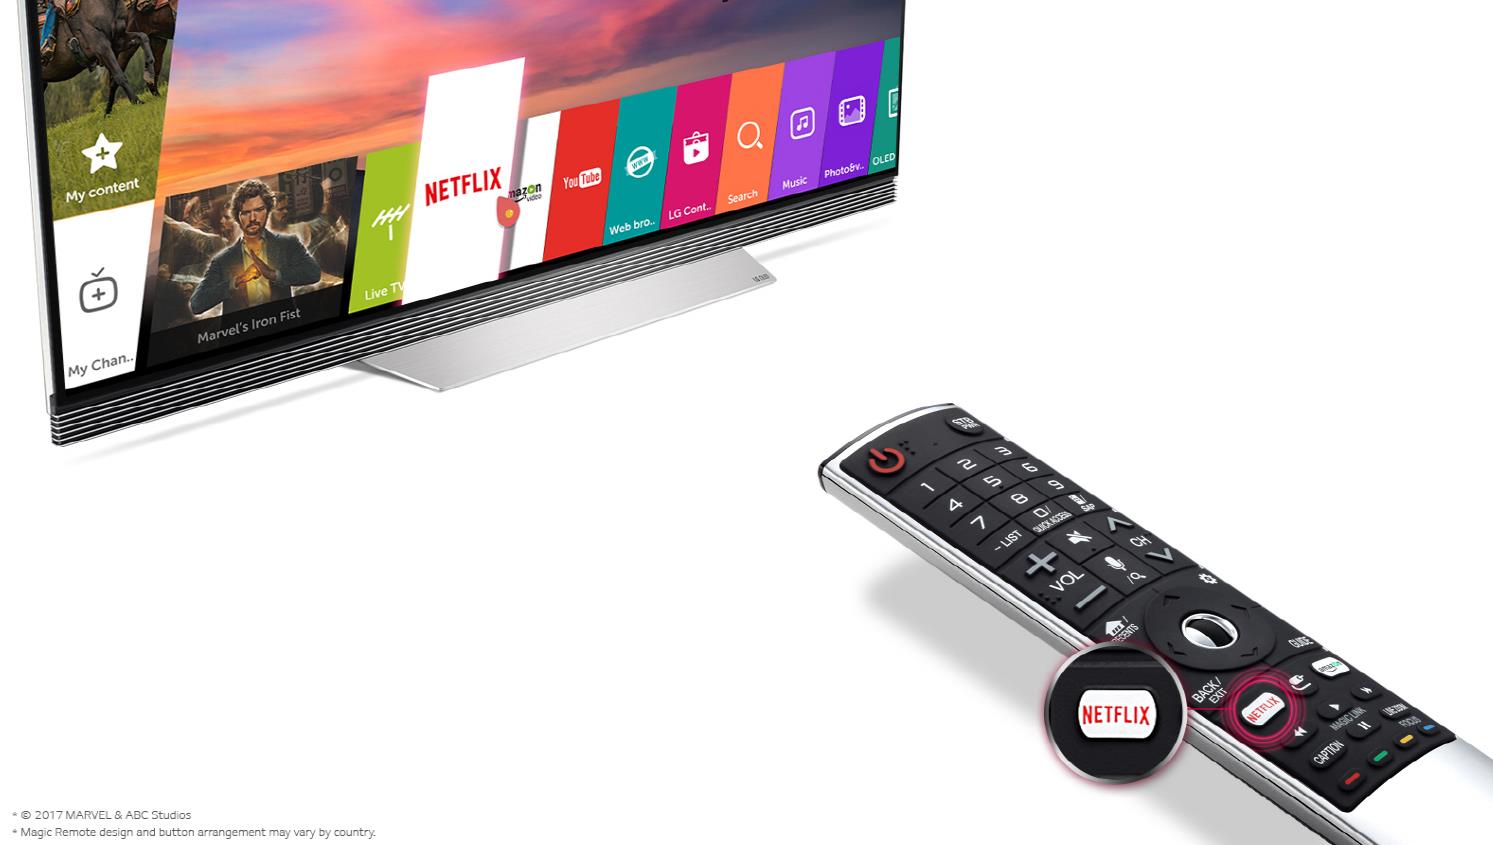 Free 3 months of Netflix with purchase of LG 4K UHD TV 1